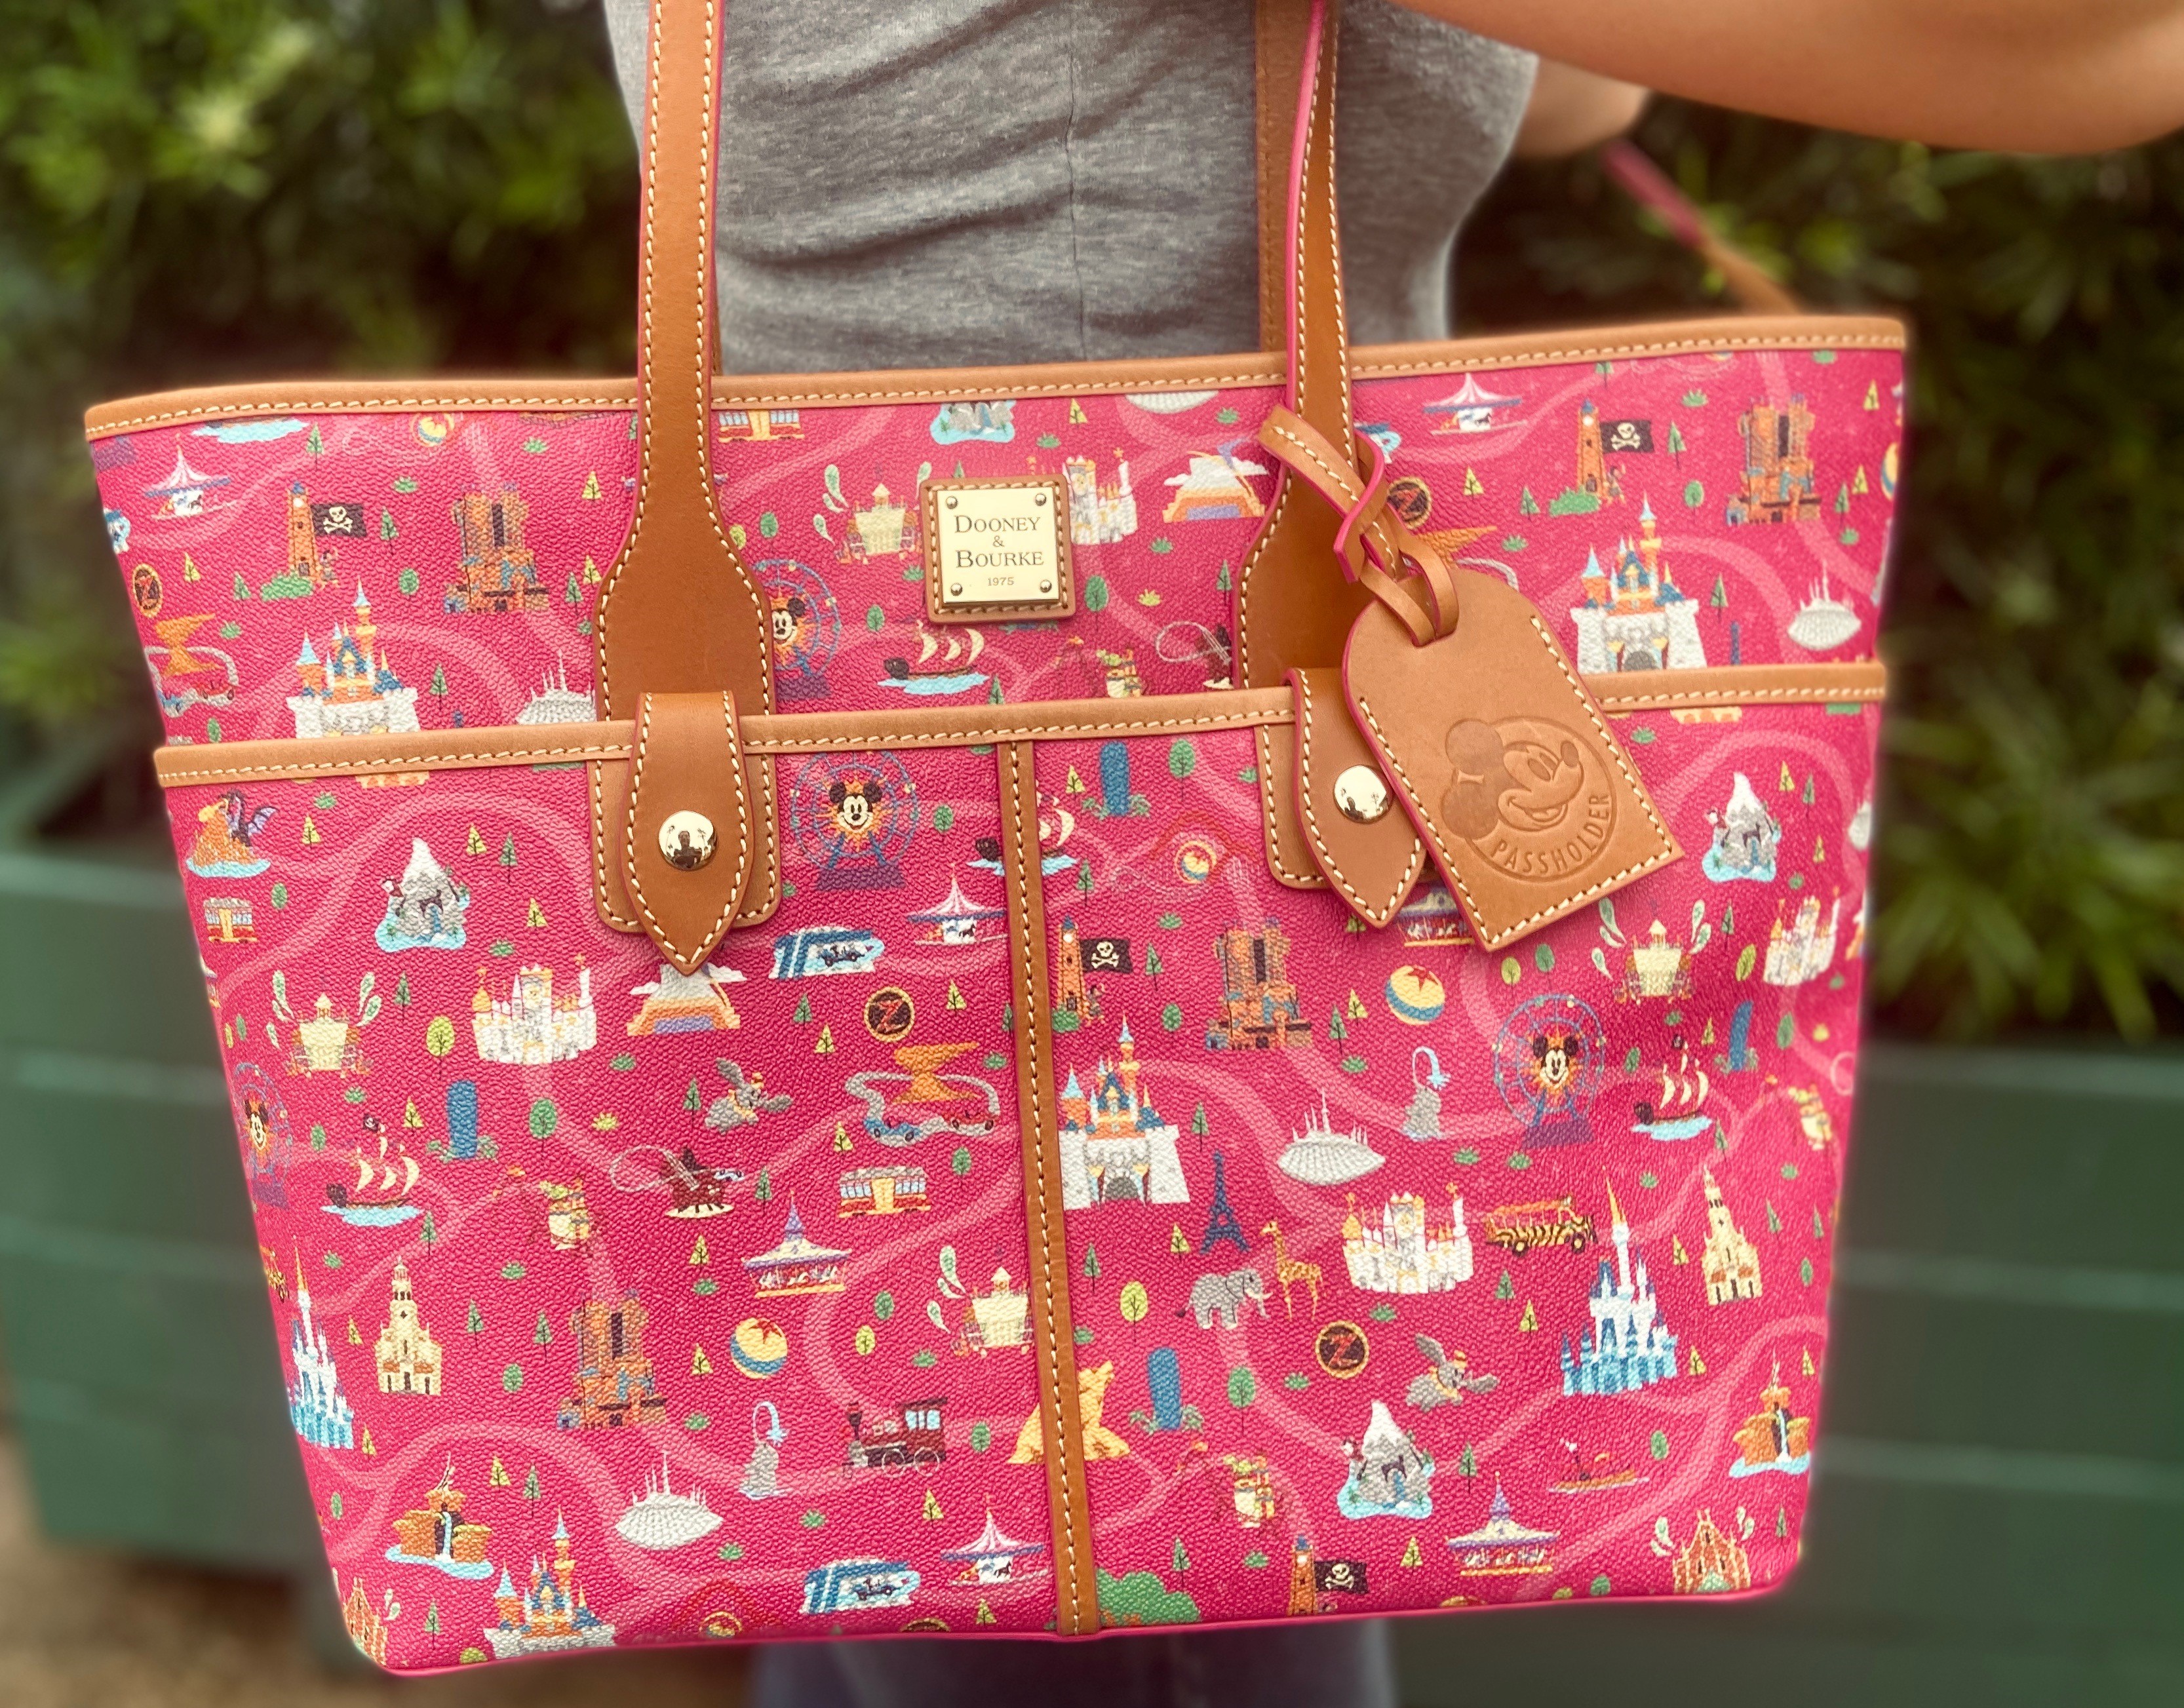 Disney in a Minute: What is Dooney & Bourke? | TouringPlans.com Blog